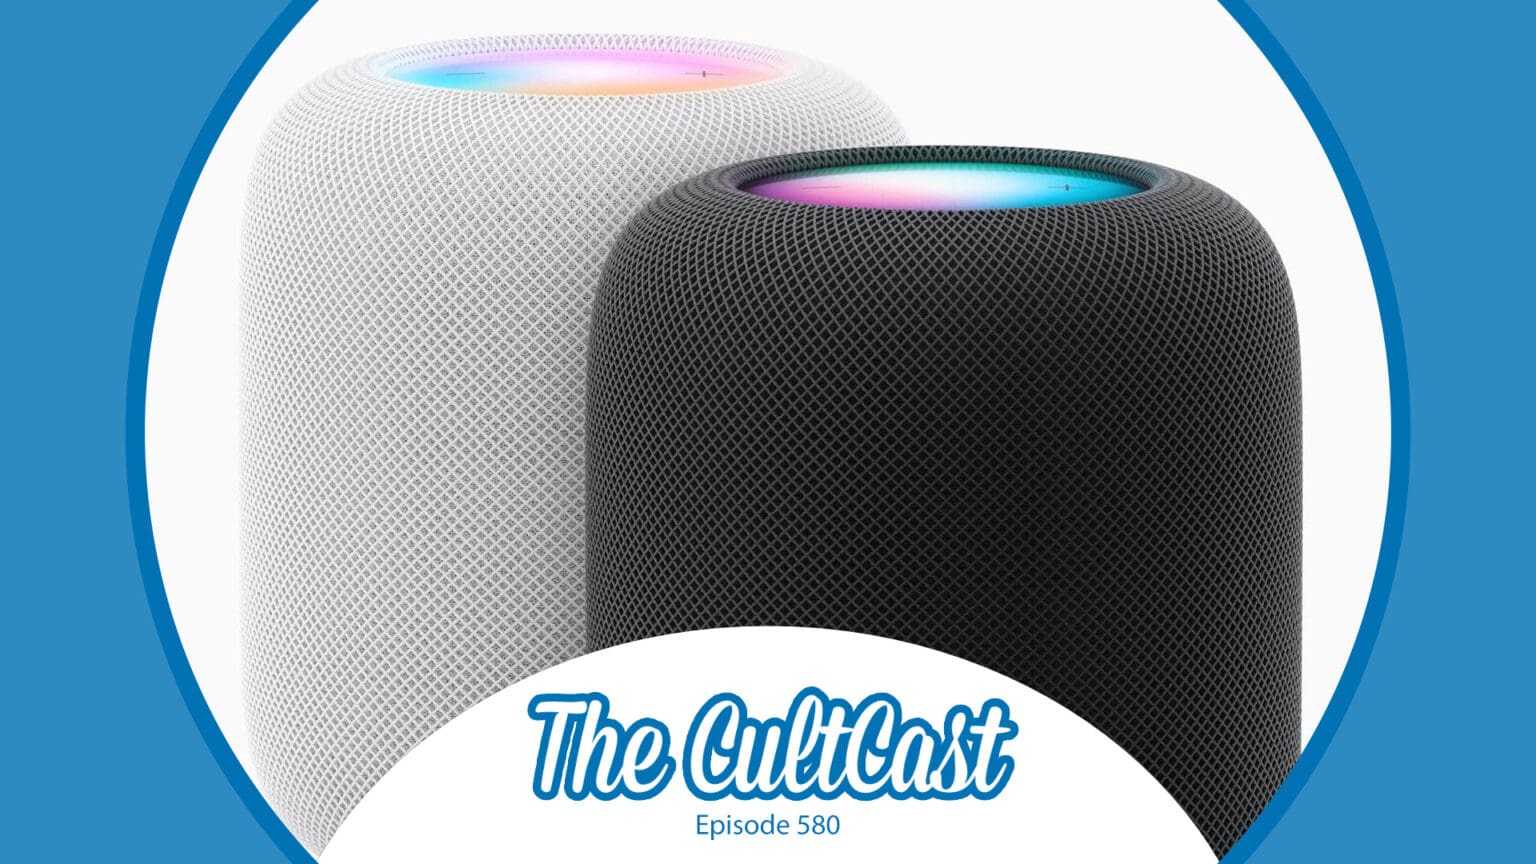 Two HomePods and the logo for 